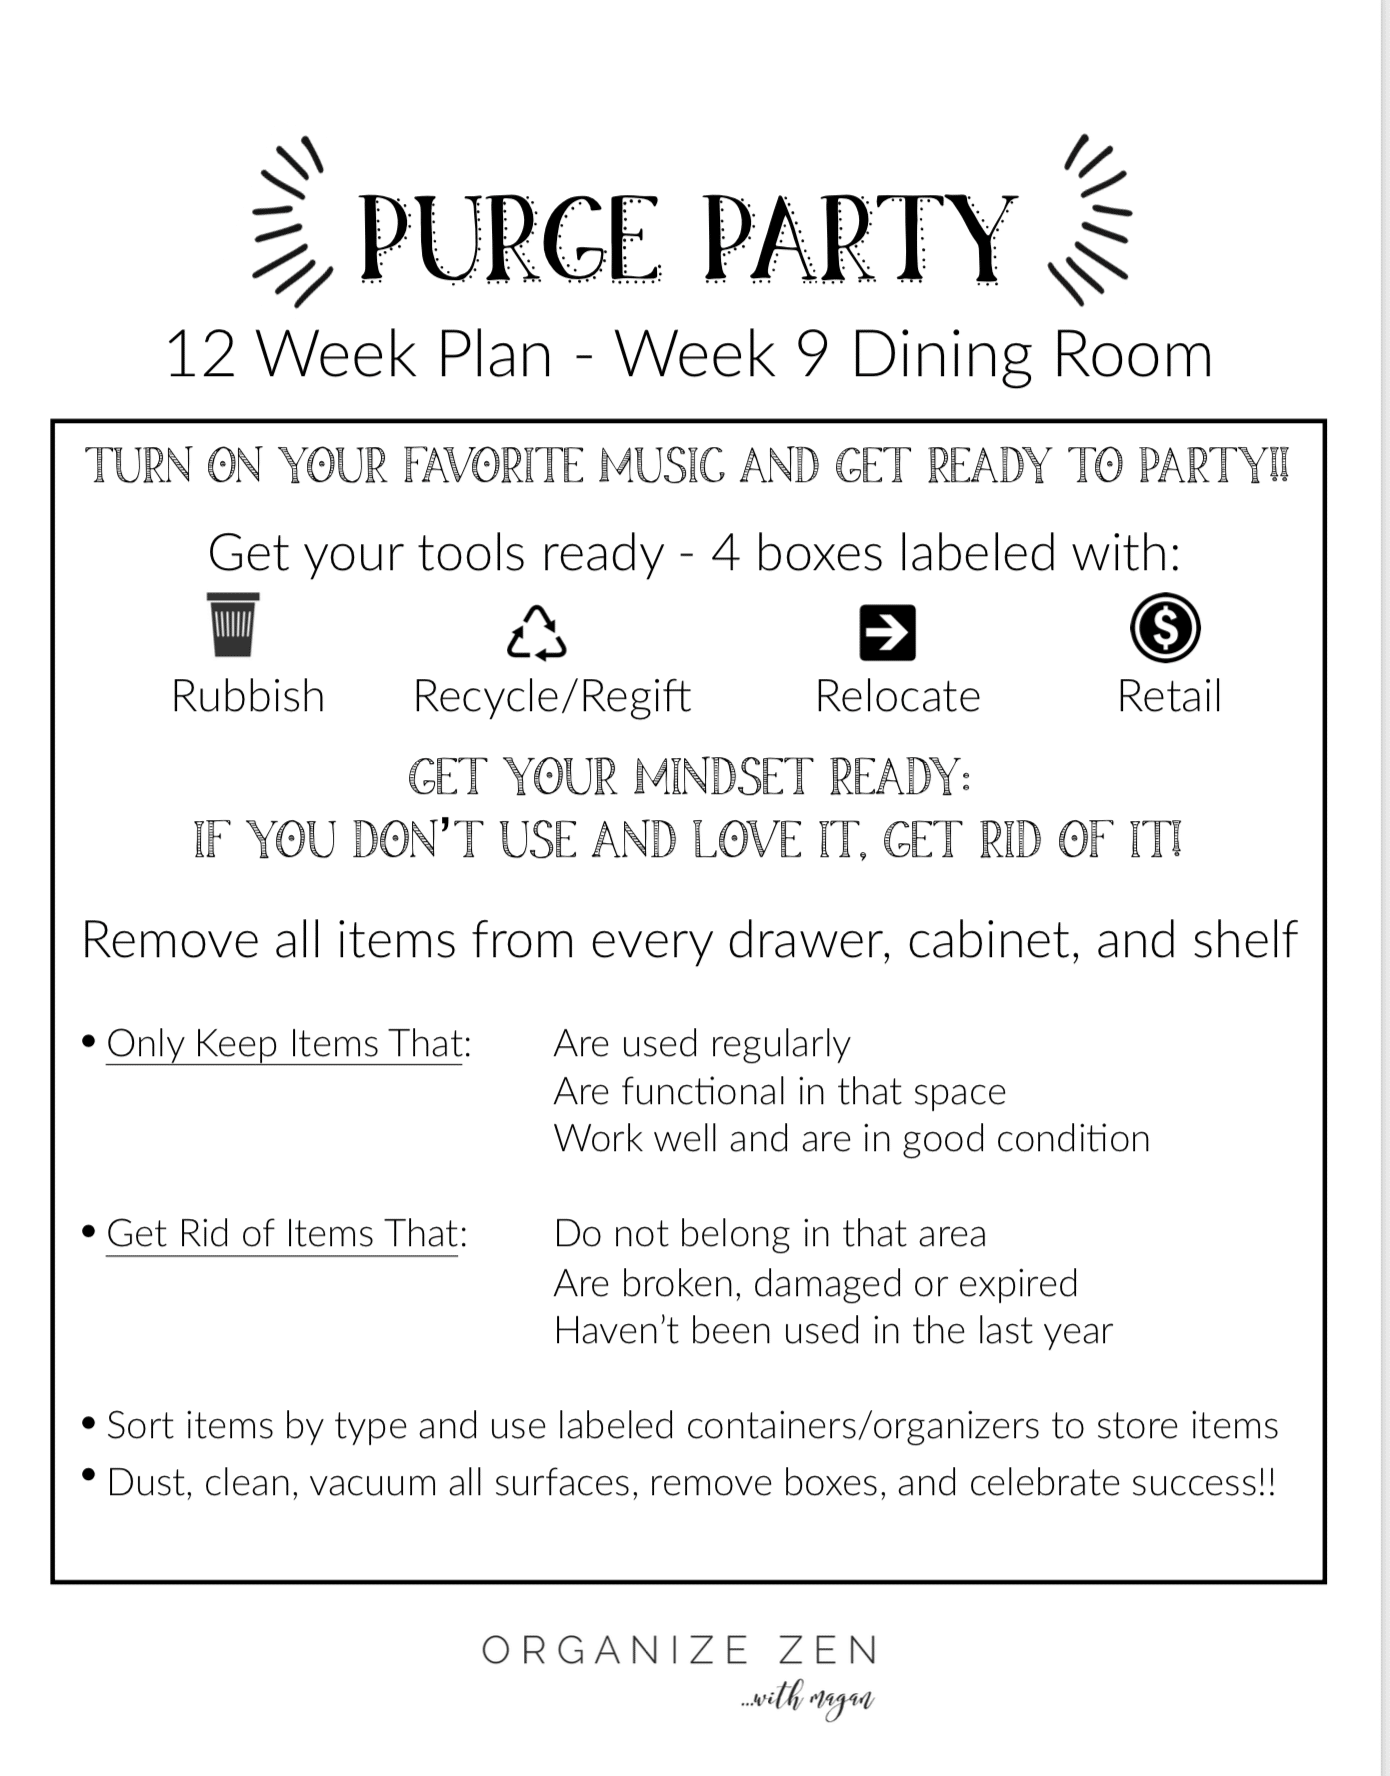 Purge Party Printable Organization plan for dining room